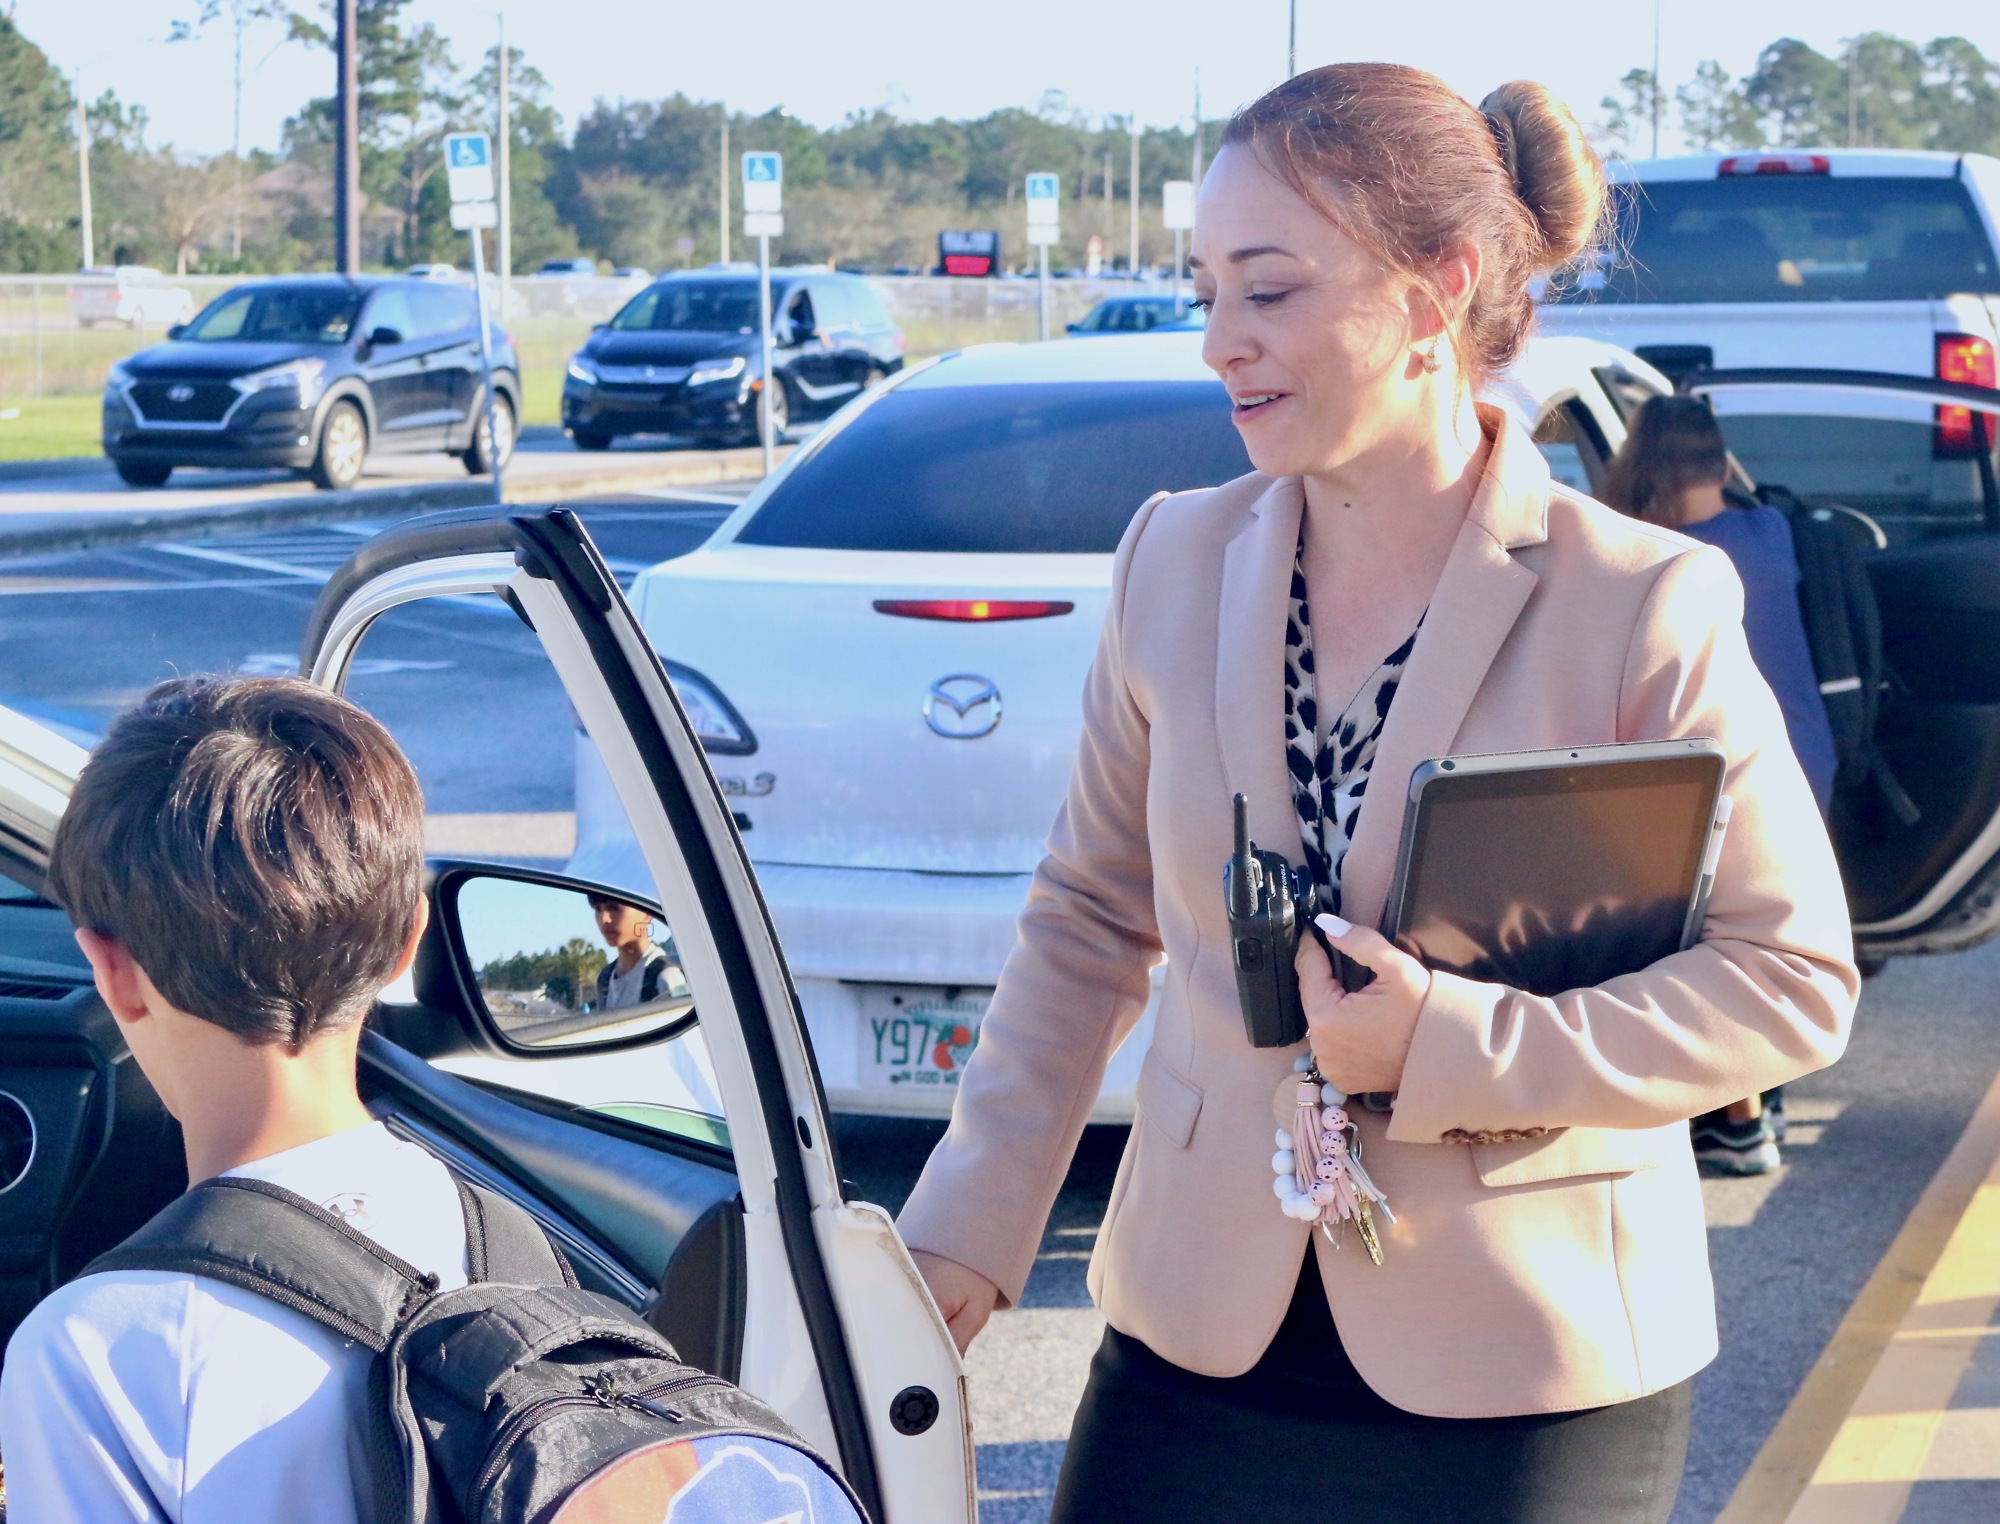 Principal Jessica DeFord takes the time to help her students into their cars, saying goodbye with a smile. Photo by Sierra Williams